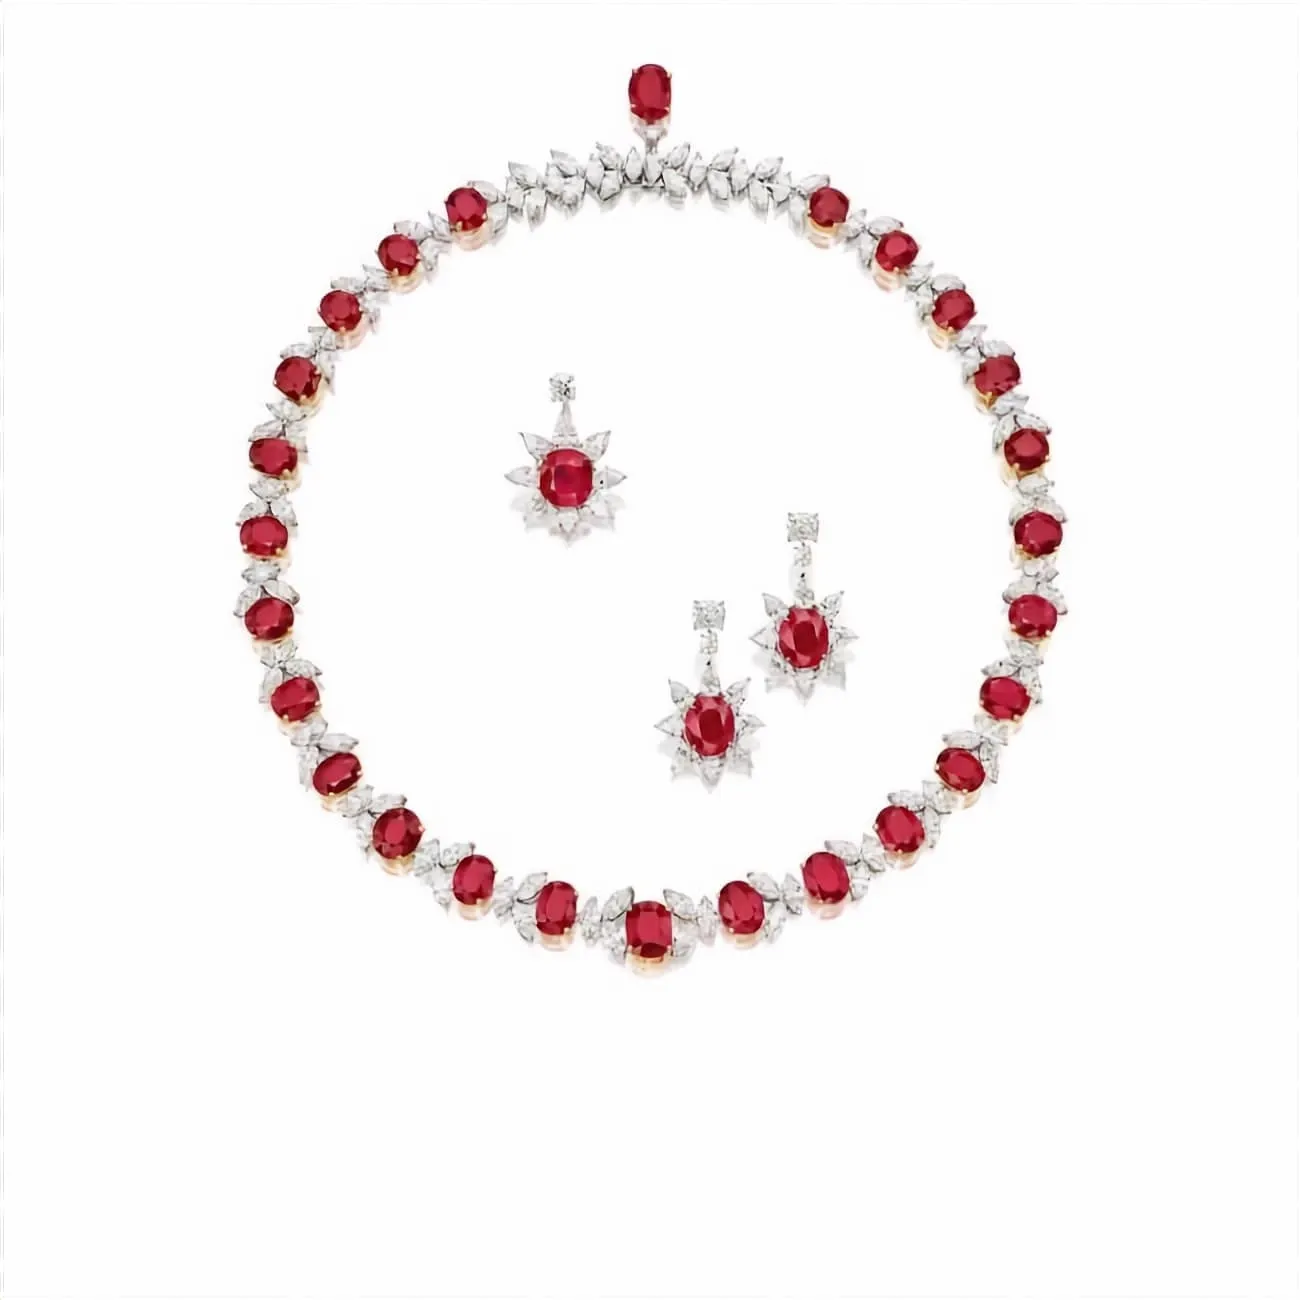 Majestic Ruby and Diamond Single Line Necklace with Earrings